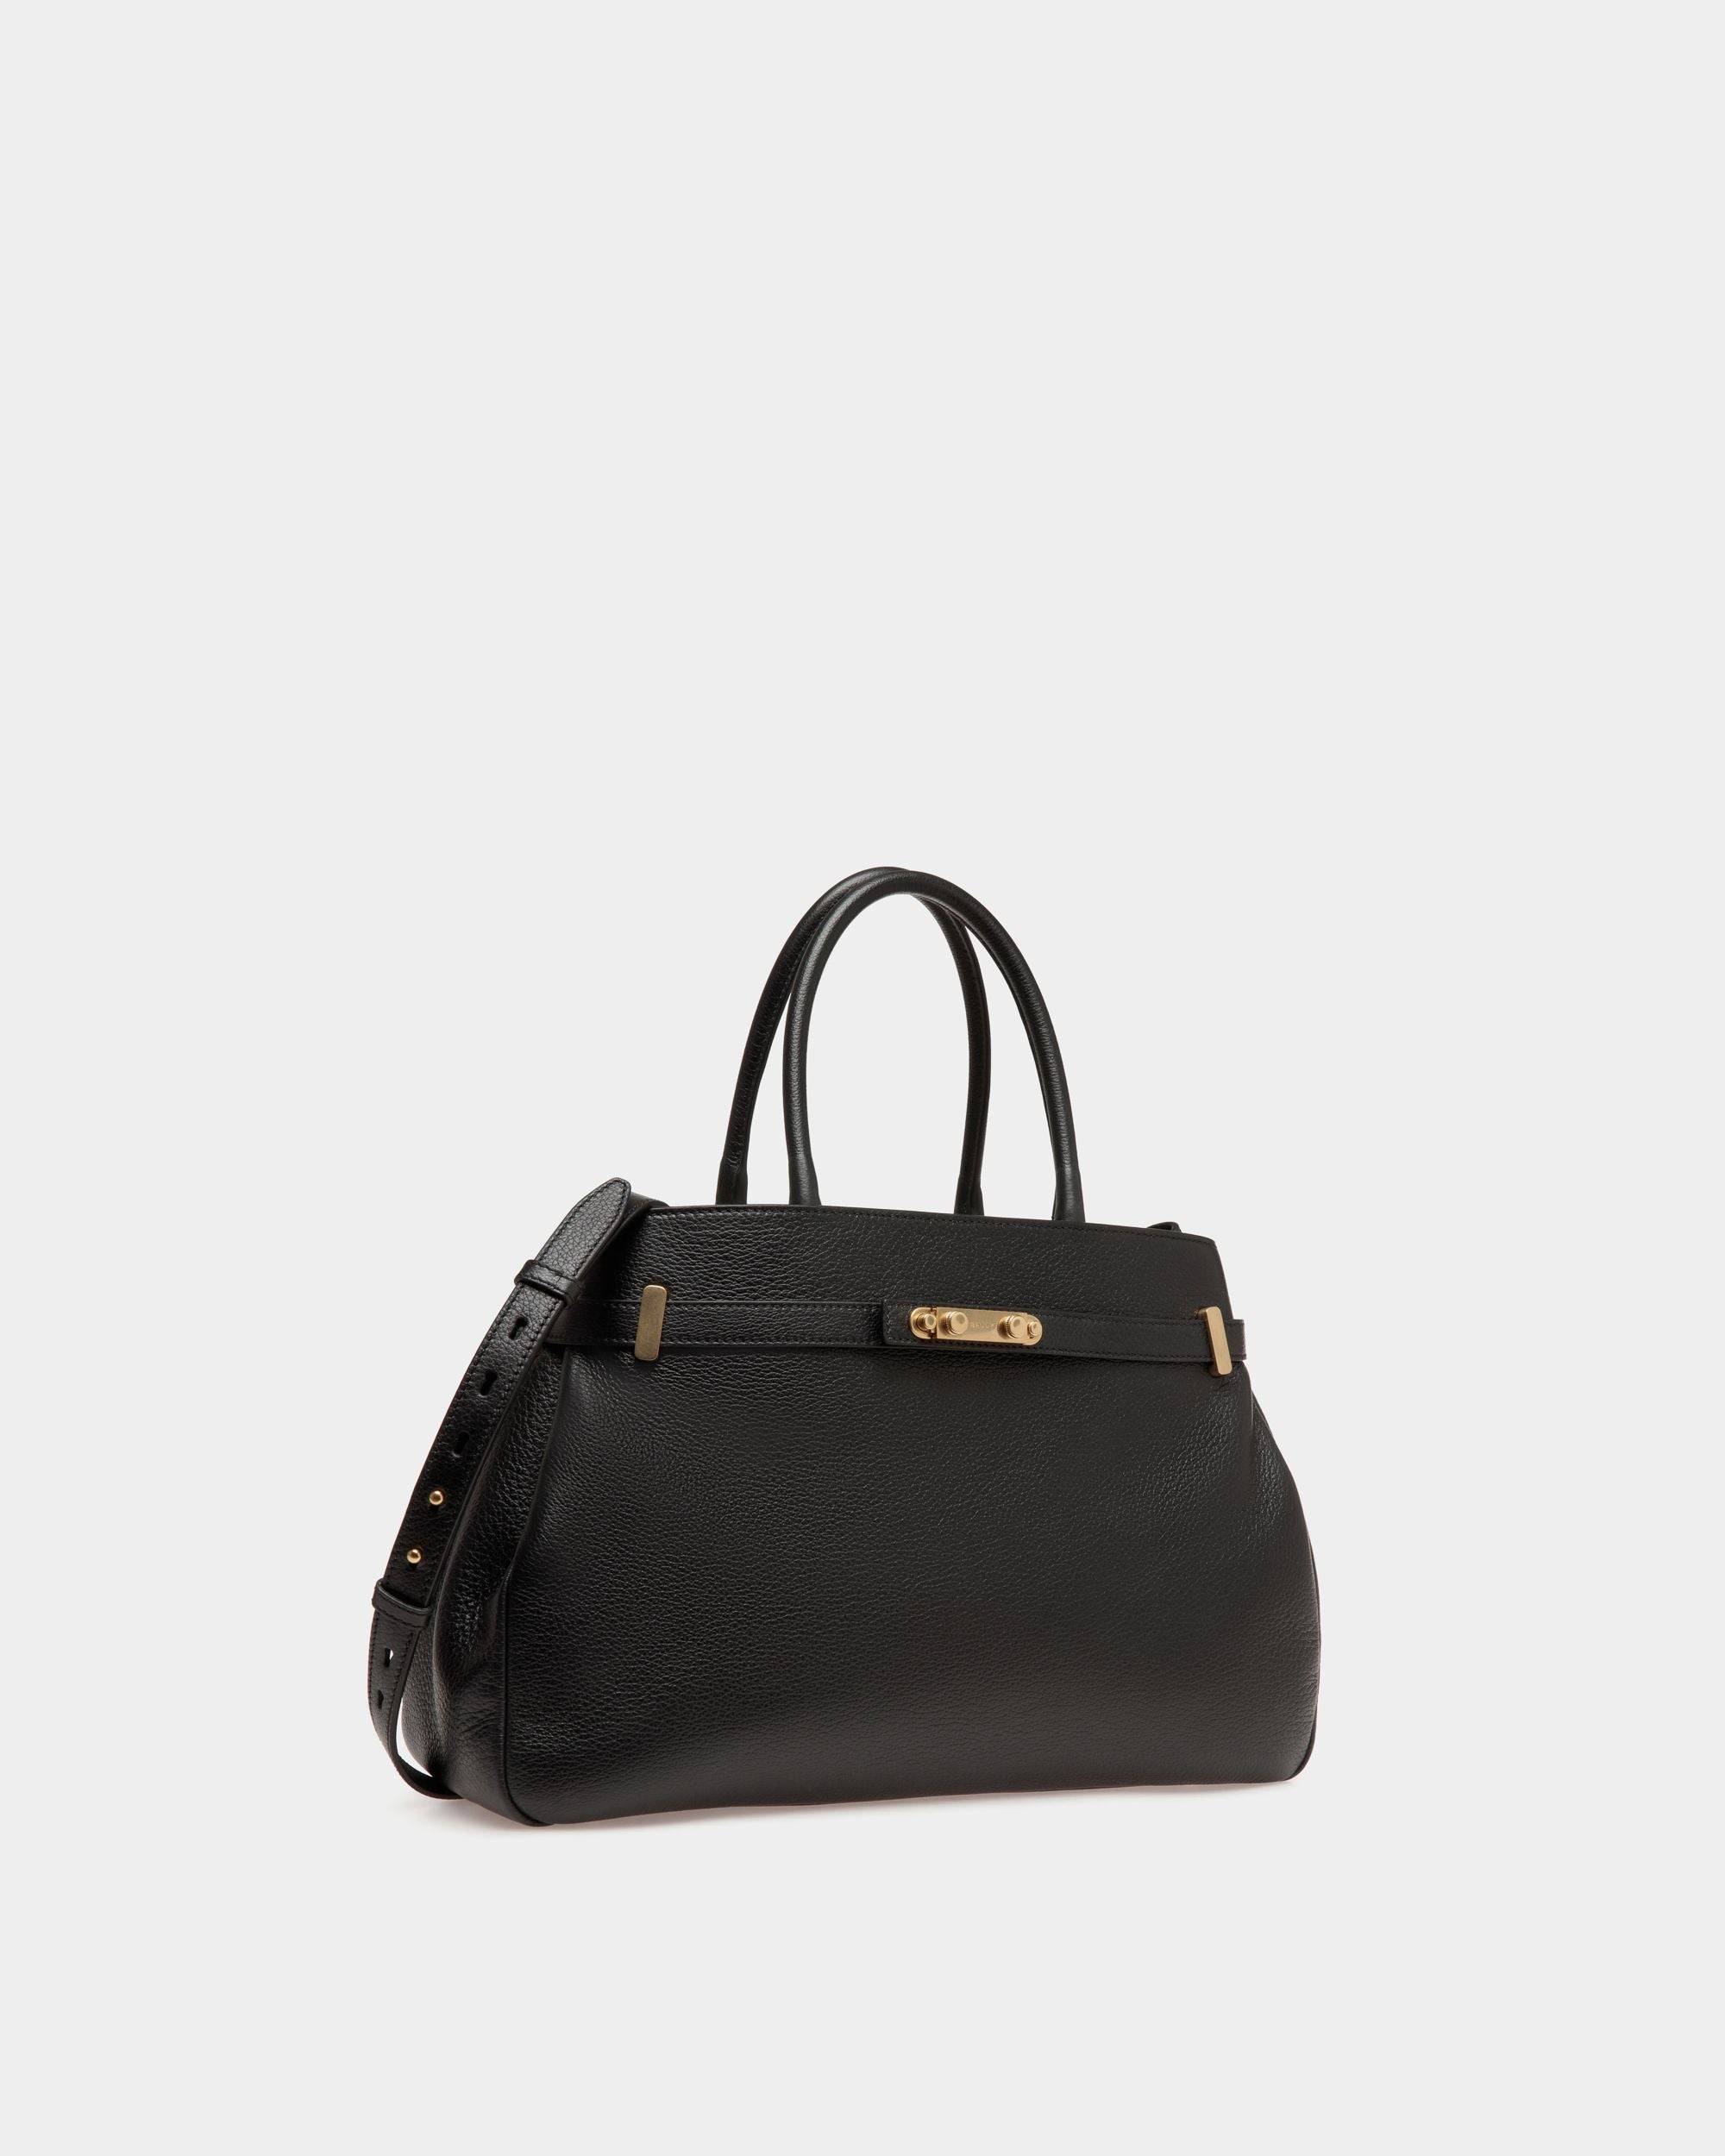 Carriage | Women's Tote in Black Leather | Bally | Still Life 3/4 Front